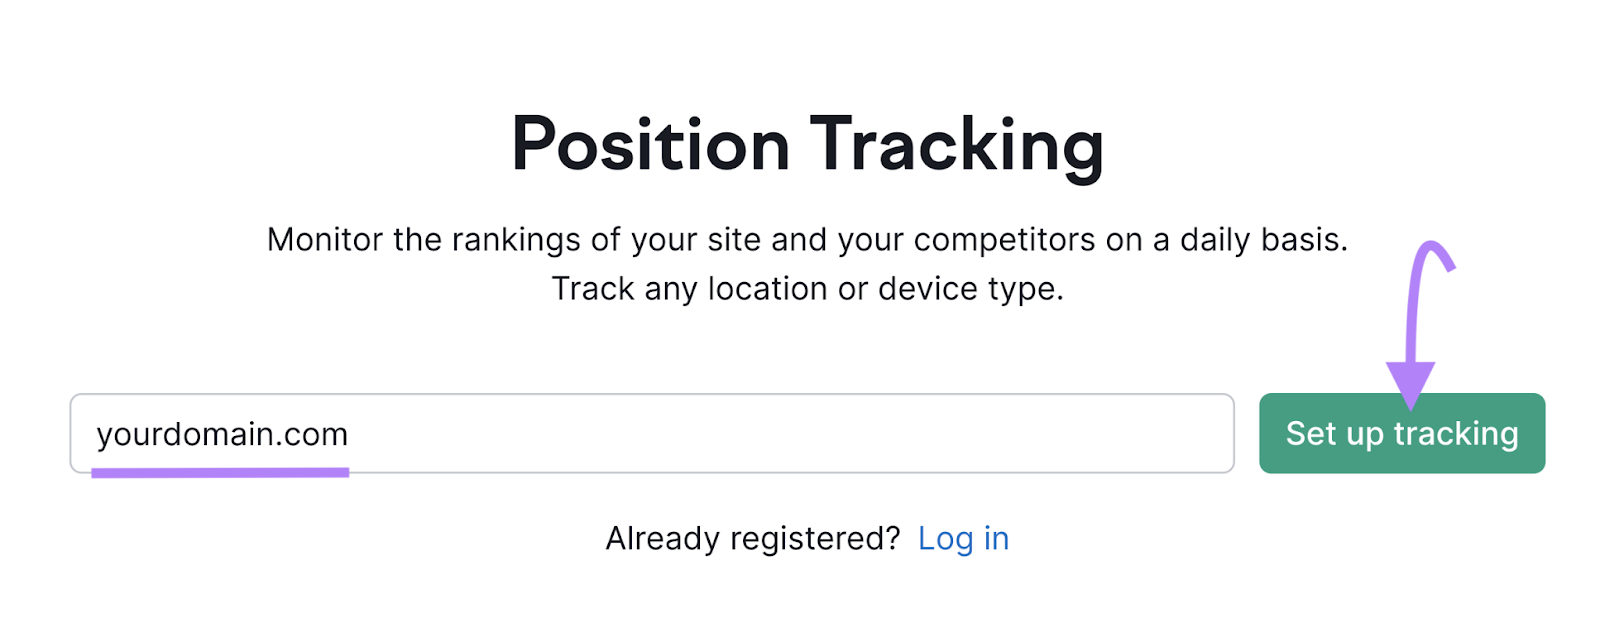 search your domain in position tracking tool